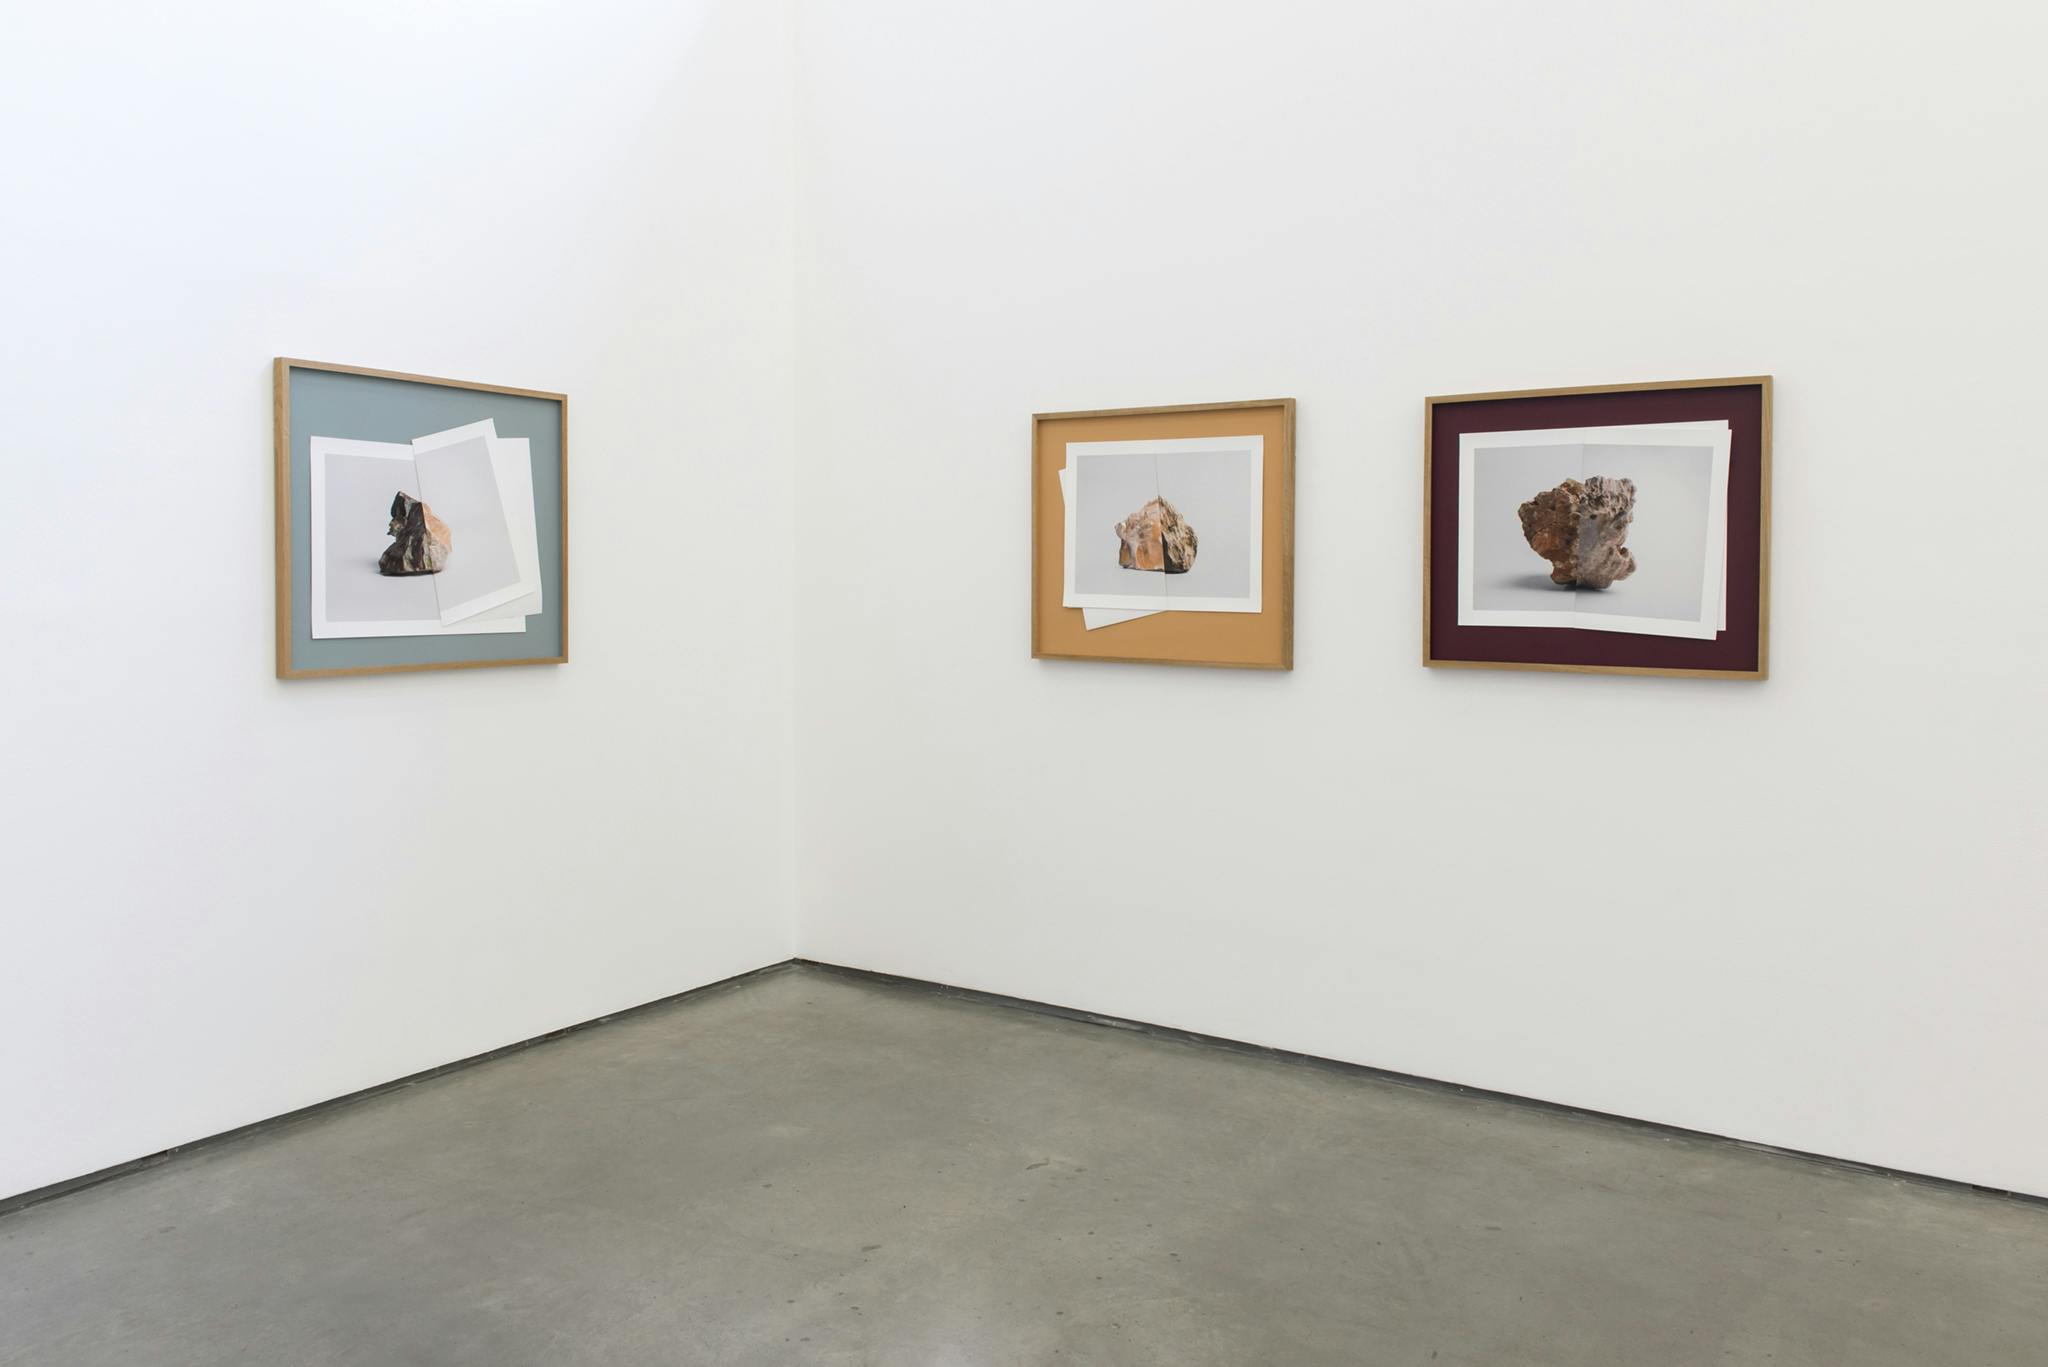 Three framed photographs of rocks hang in a gallery space. Each frame contains two folded photographs of rocks that connect at the fold to create an image of one, composite rock.